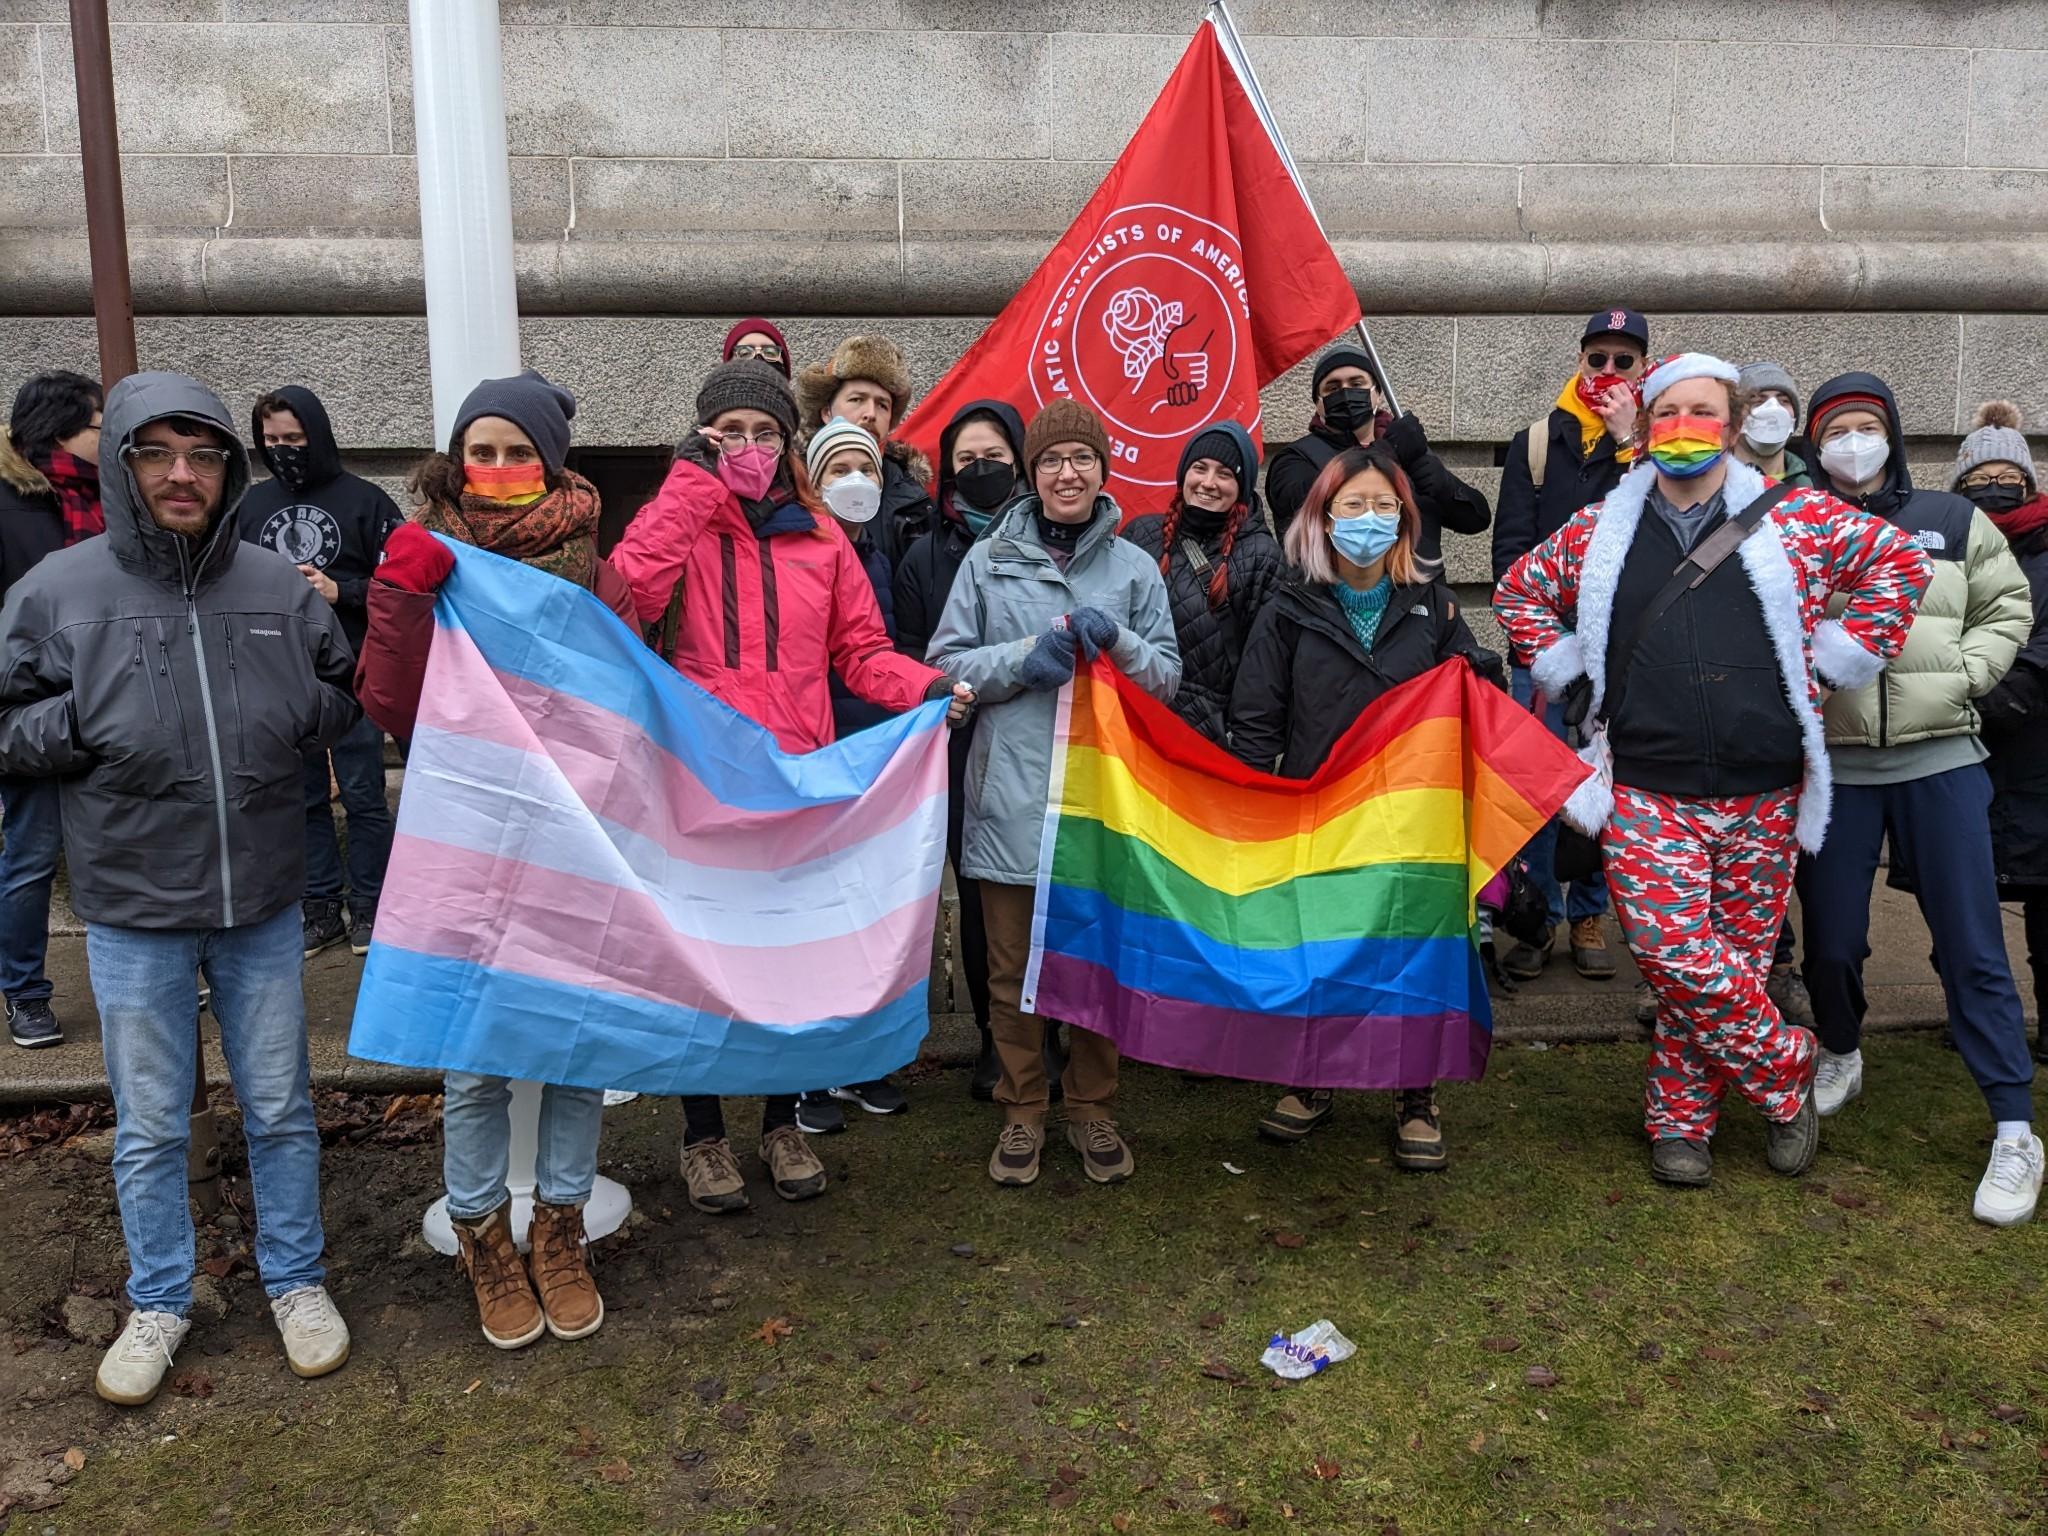 About 15 bembers of the Boston DSA contingent pose with a DSA flag and pride flags outside the Fall River Public Library